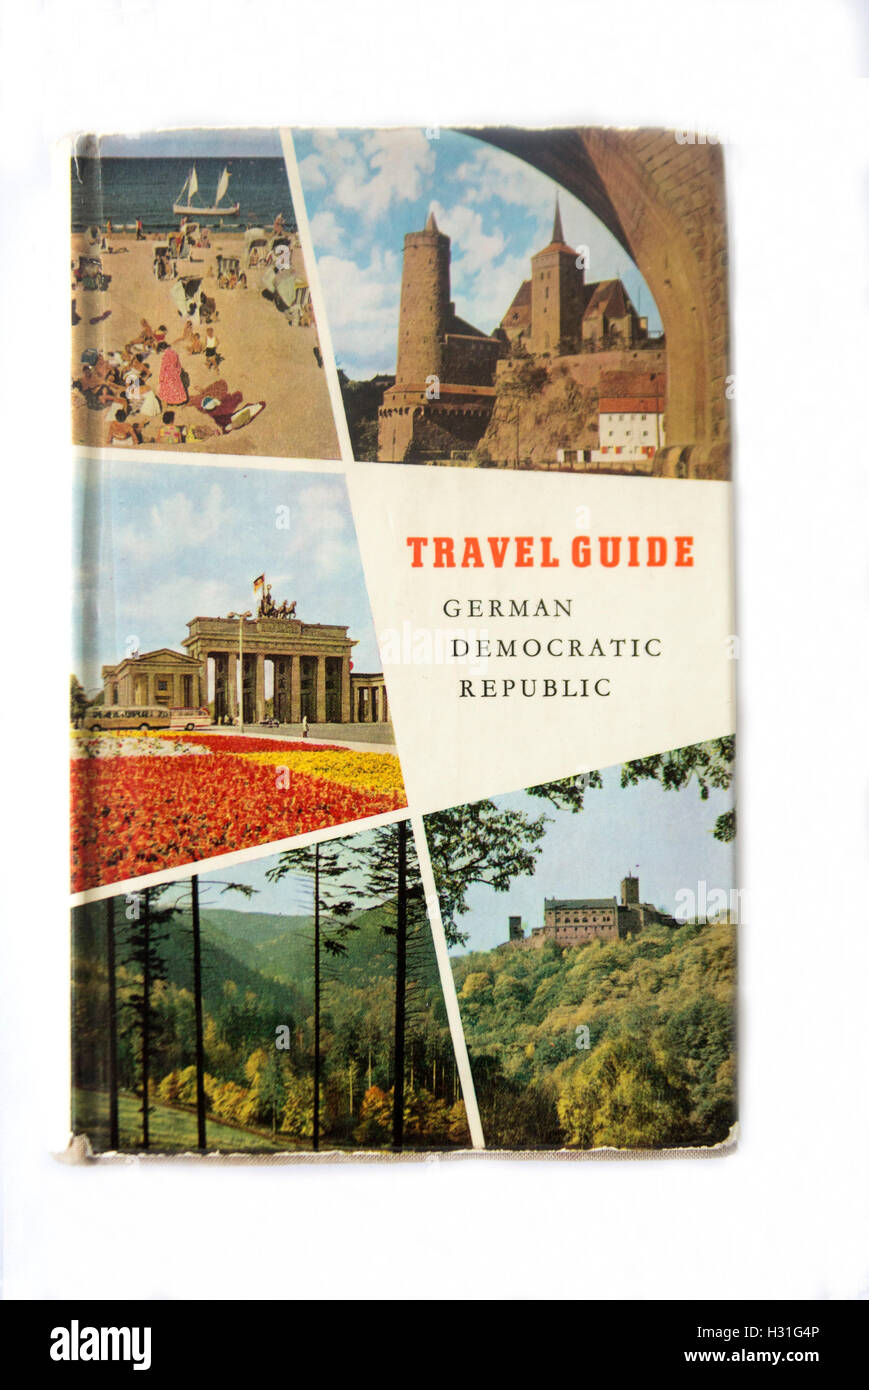 Travel Guide to GDR German Democratic Republic East Germany Published 1962 English language version Stock Photo